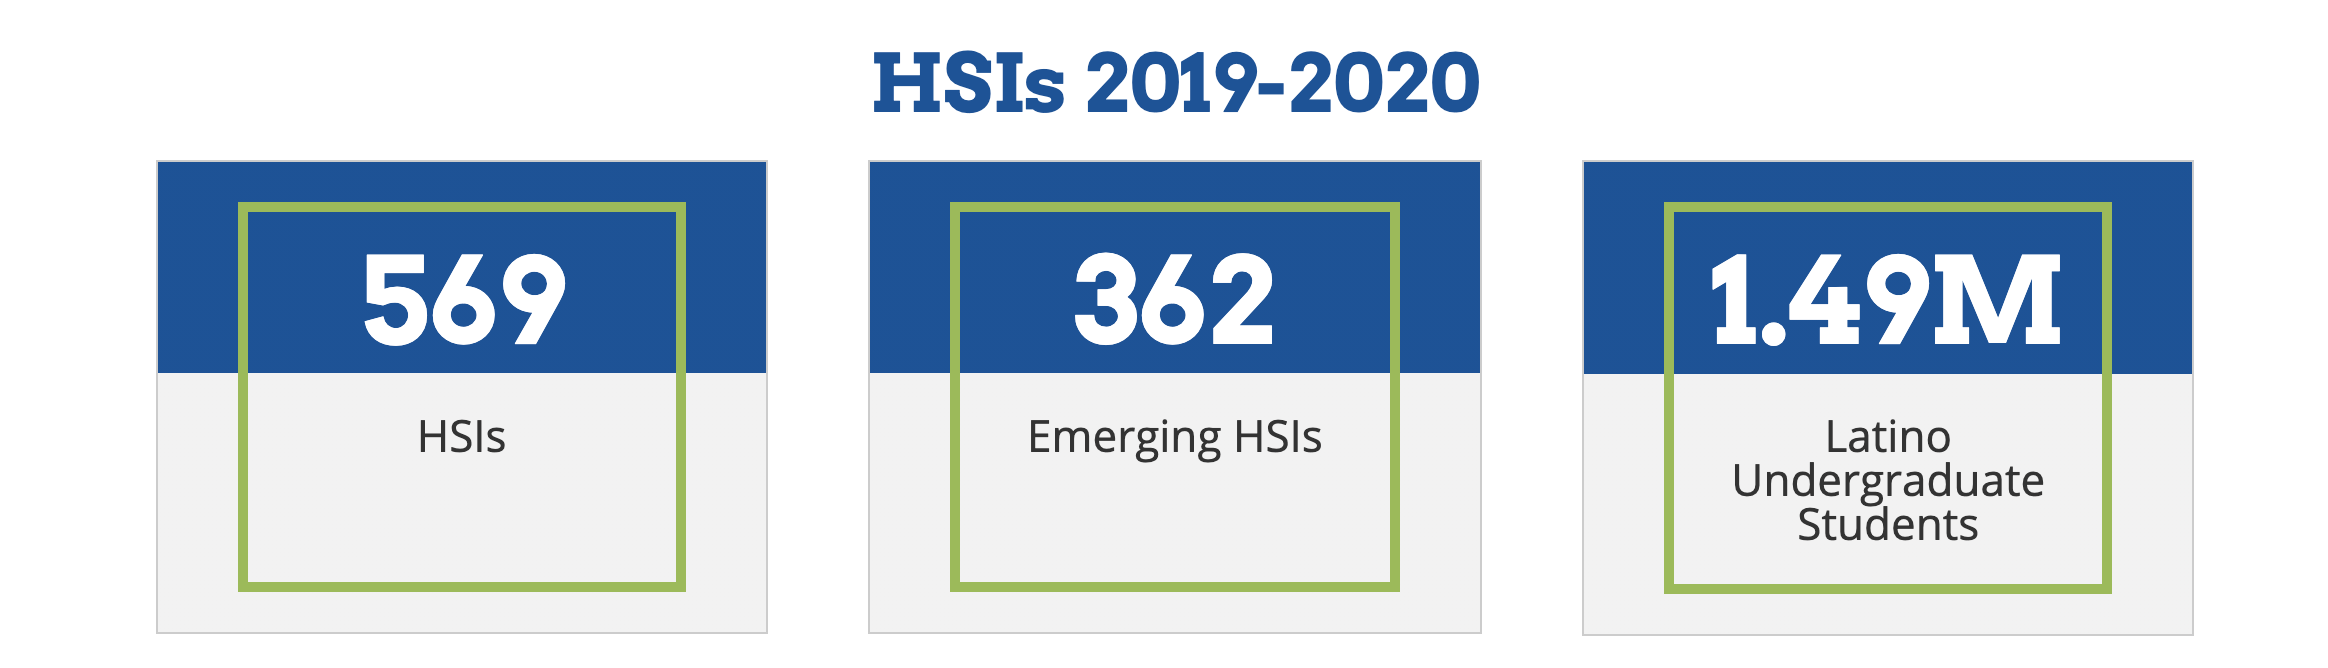 Hispanic-Serving Institutions (HSIs) 2018-2019 Stats